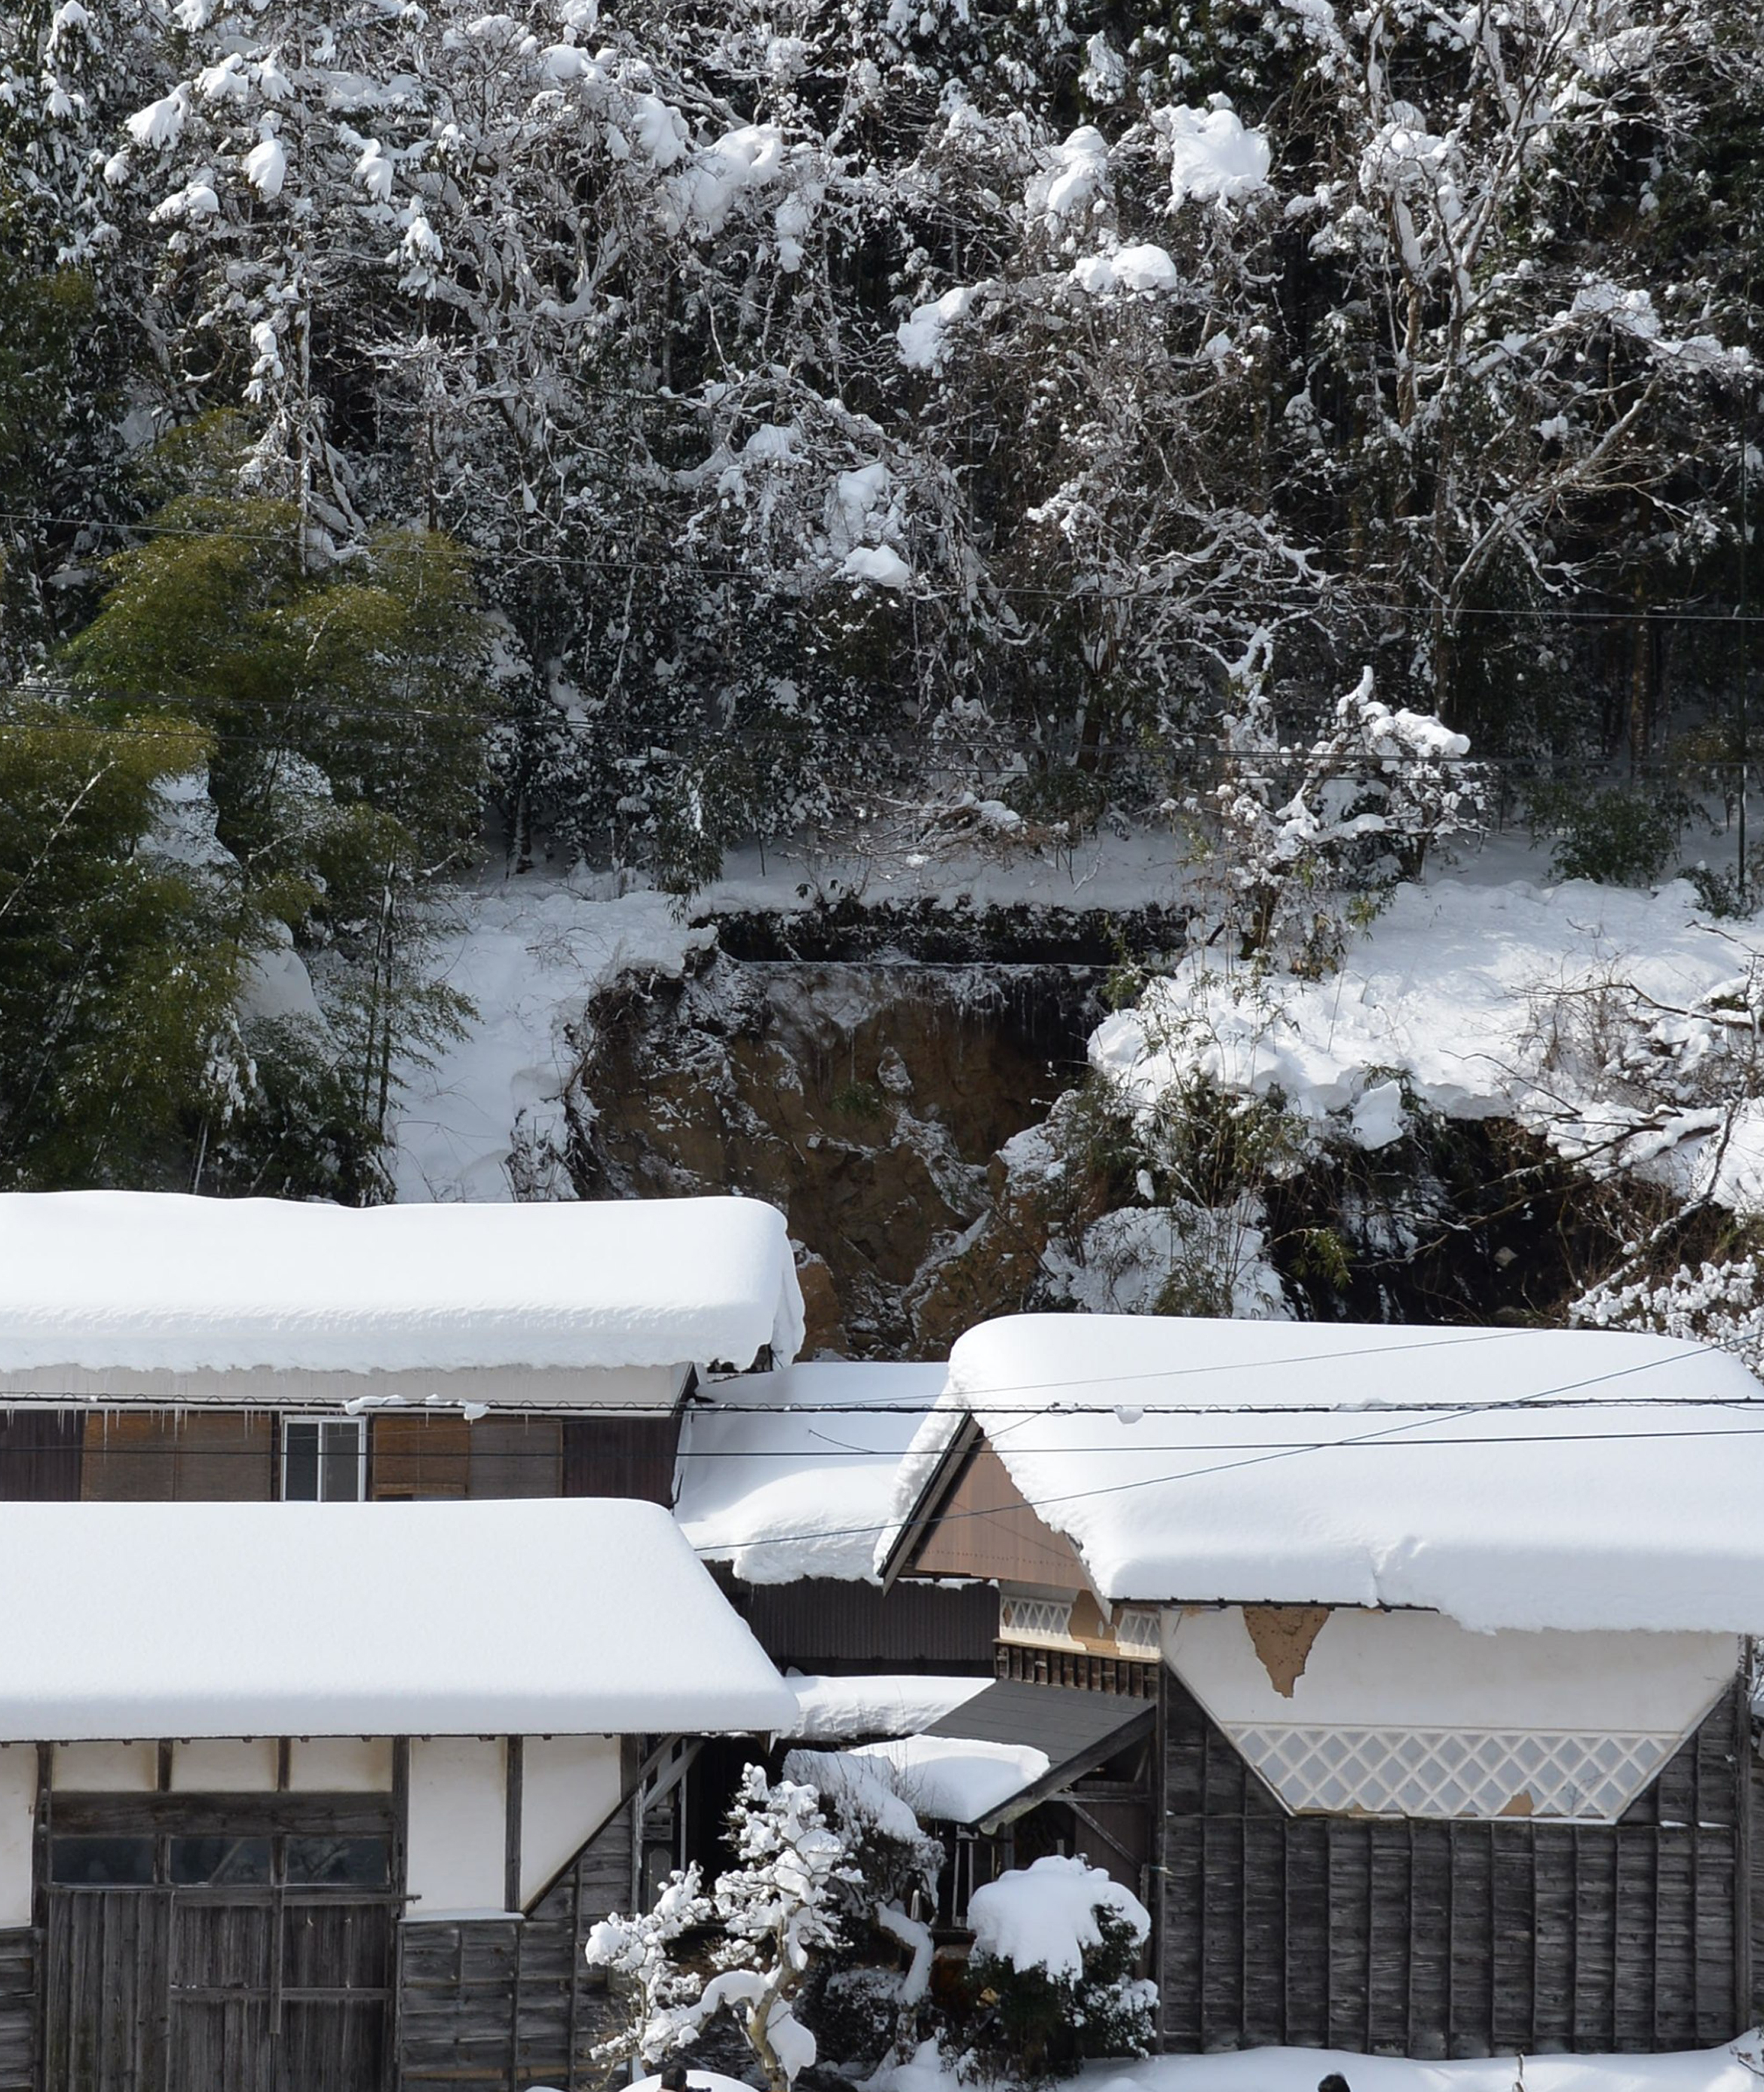 Heavy snow continues to fall in western Japan